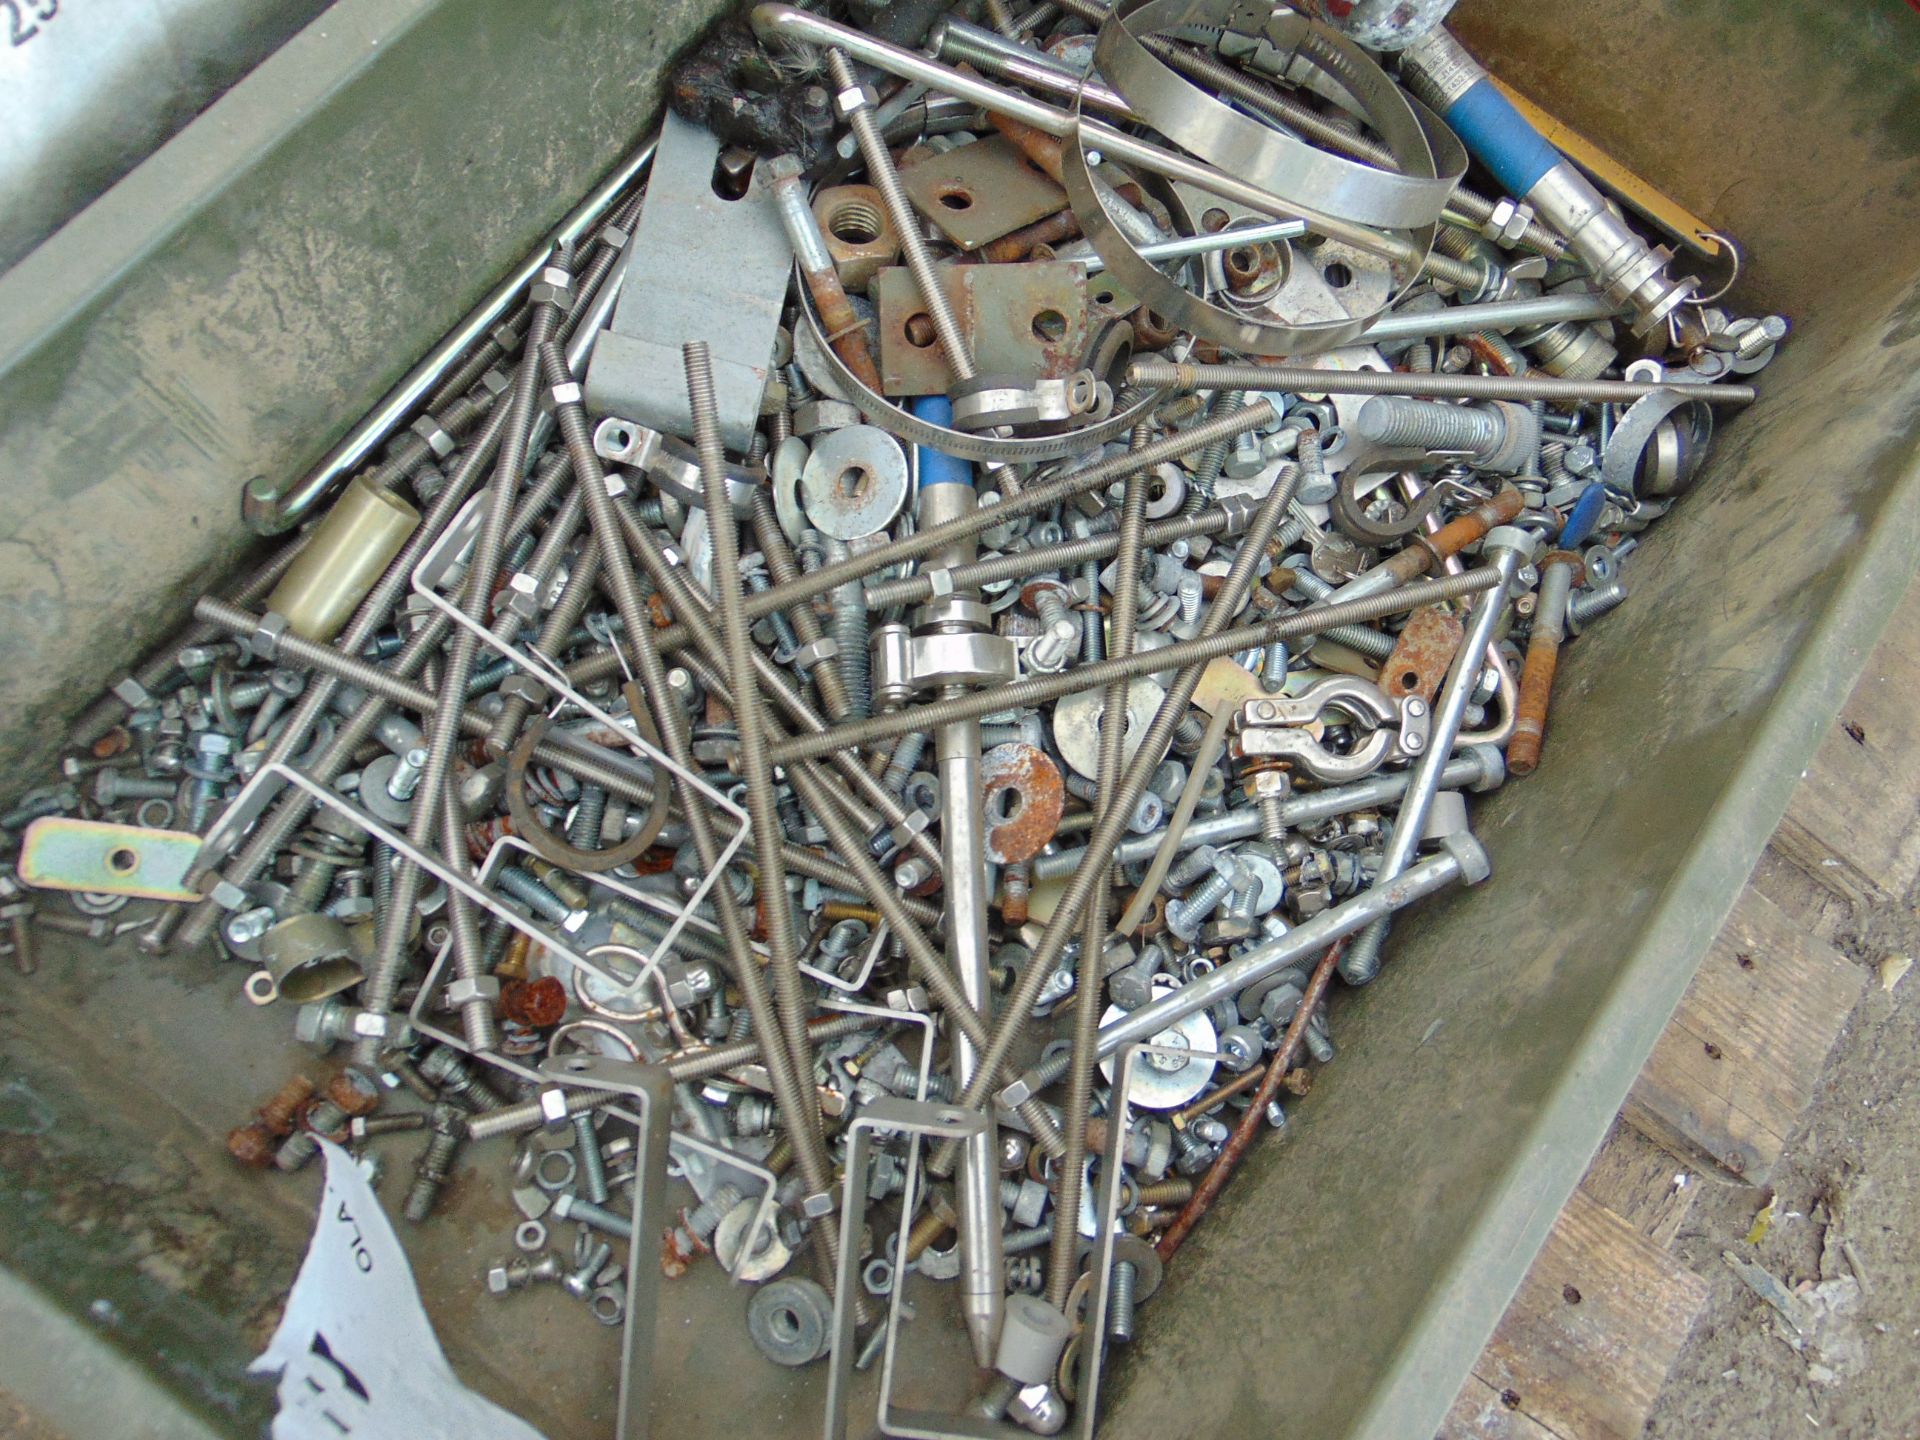 1 x Pallet of Air Lines, Stirrup Pumps, Nuts Bolts etc - Image 7 of 7